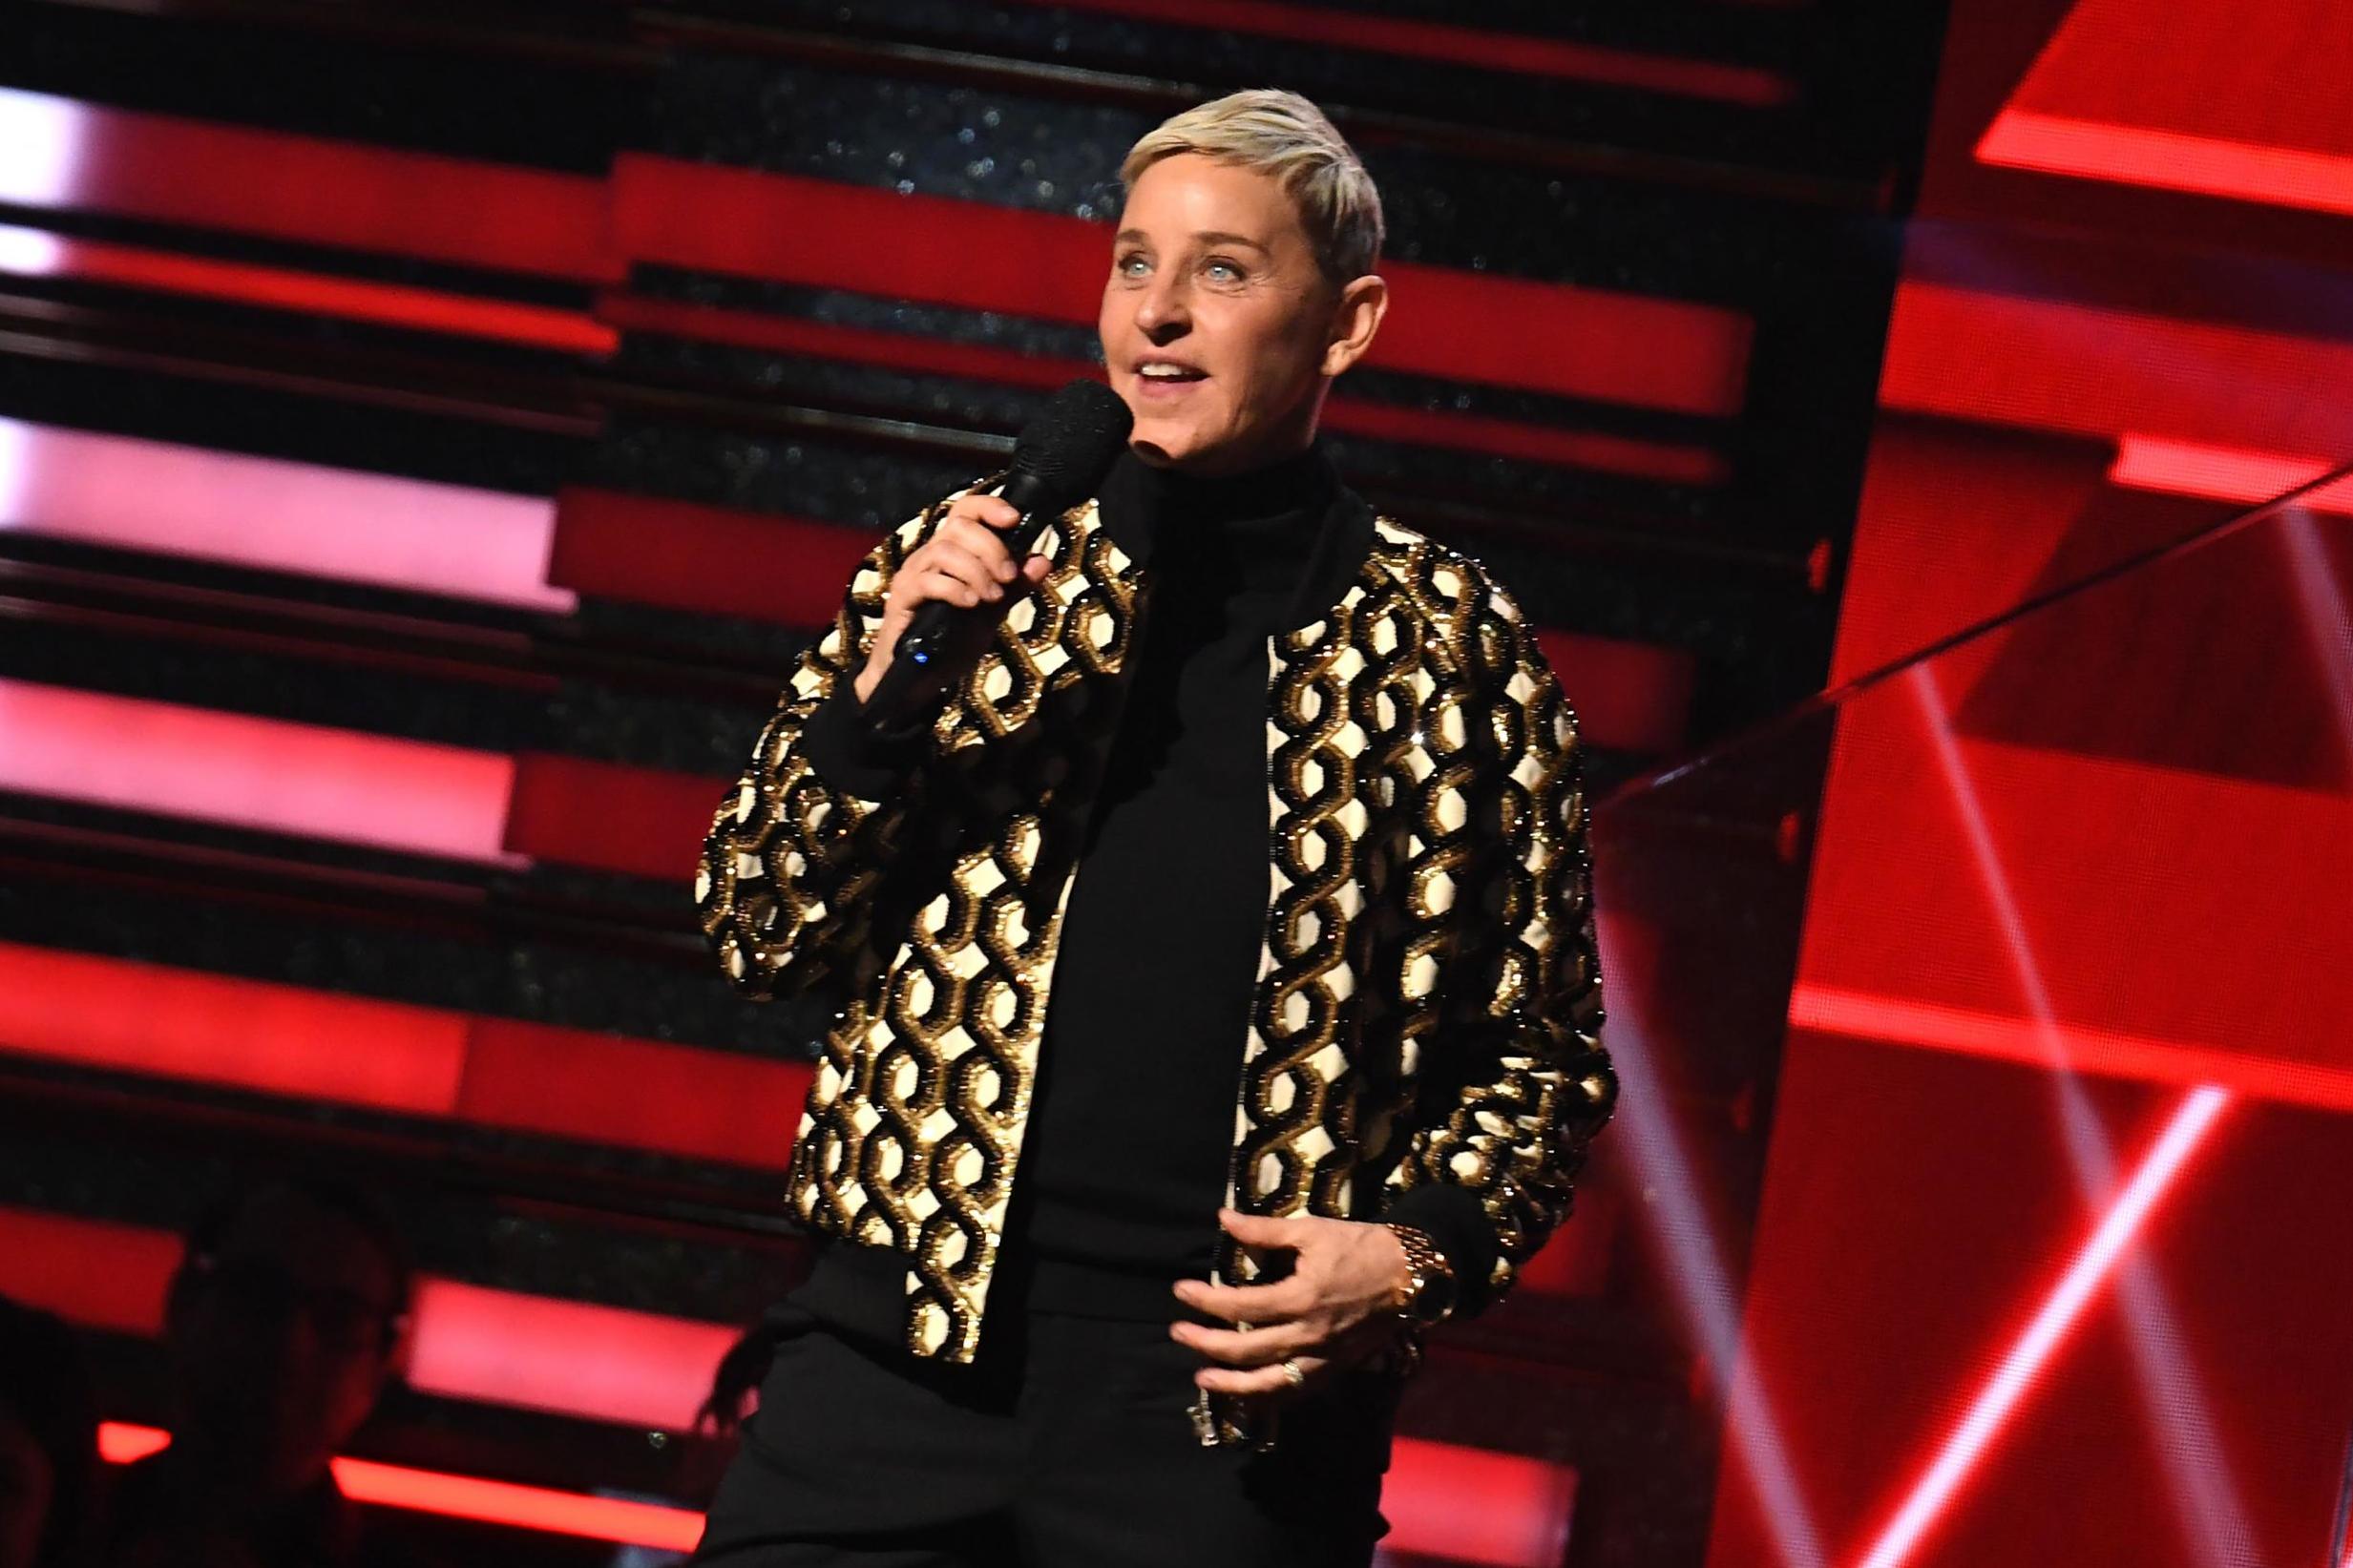 Ellen DeGeneres at the 62nd Grammy Awards on 26 January 2020, in Los Angeles.